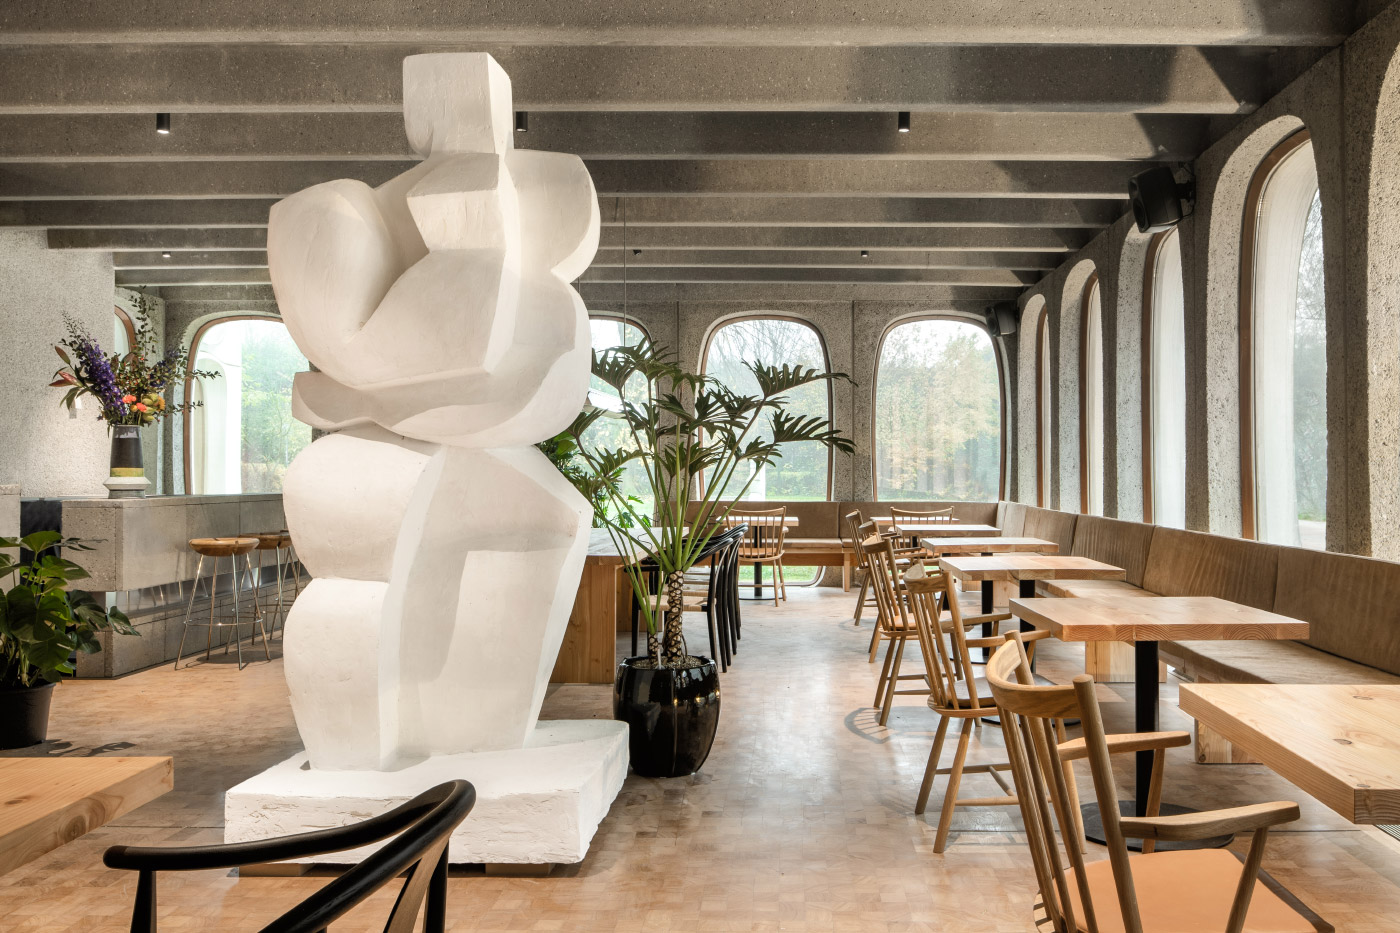 A white statue in a cafe area